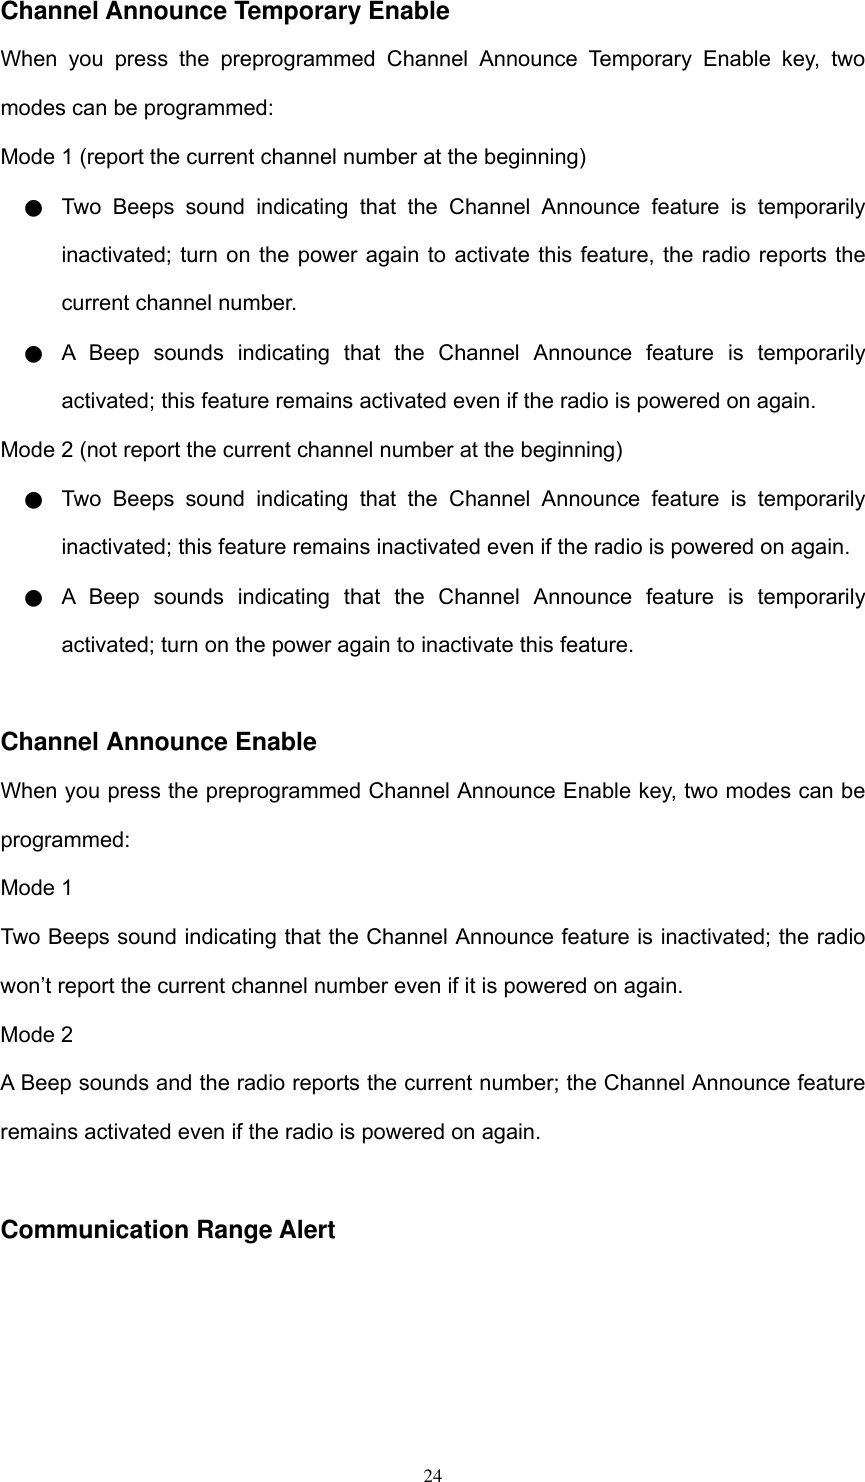  24Channel Announce Temporary Enable When you press the preprogrammed Channel Announce Temporary Enable key, two modes can be programmed: Mode 1 (report the current channel number at the beginning) ● Two Beeps sound indicating that the Channel Announce feature is temporarily inactivated; turn on the power again to activate this feature, the radio reports the current channel number. ● A Beep sounds indicating that the Channel Announce feature is temporarily activated; this feature remains activated even if the radio is powered on again. Mode 2 (not report the current channel number at the beginning) ● Two Beeps sound indicating that the Channel Announce feature is temporarily inactivated; this feature remains inactivated even if the radio is powered on again. ● A Beep sounds indicating that the Channel Announce feature is temporarily activated; turn on the power again to inactivate this feature.  Channel Announce Enable When you press the preprogrammed Channel Announce Enable key, two modes can be programmed: Mode 1 Two Beeps sound indicating that the Channel Announce feature is inactivated; the radio won’t report the current channel number even if it is powered on again. Mode 2 A Beep sounds and the radio reports the current number; the Channel Announce feature remains activated even if the radio is powered on again.  Communication Range Alert     